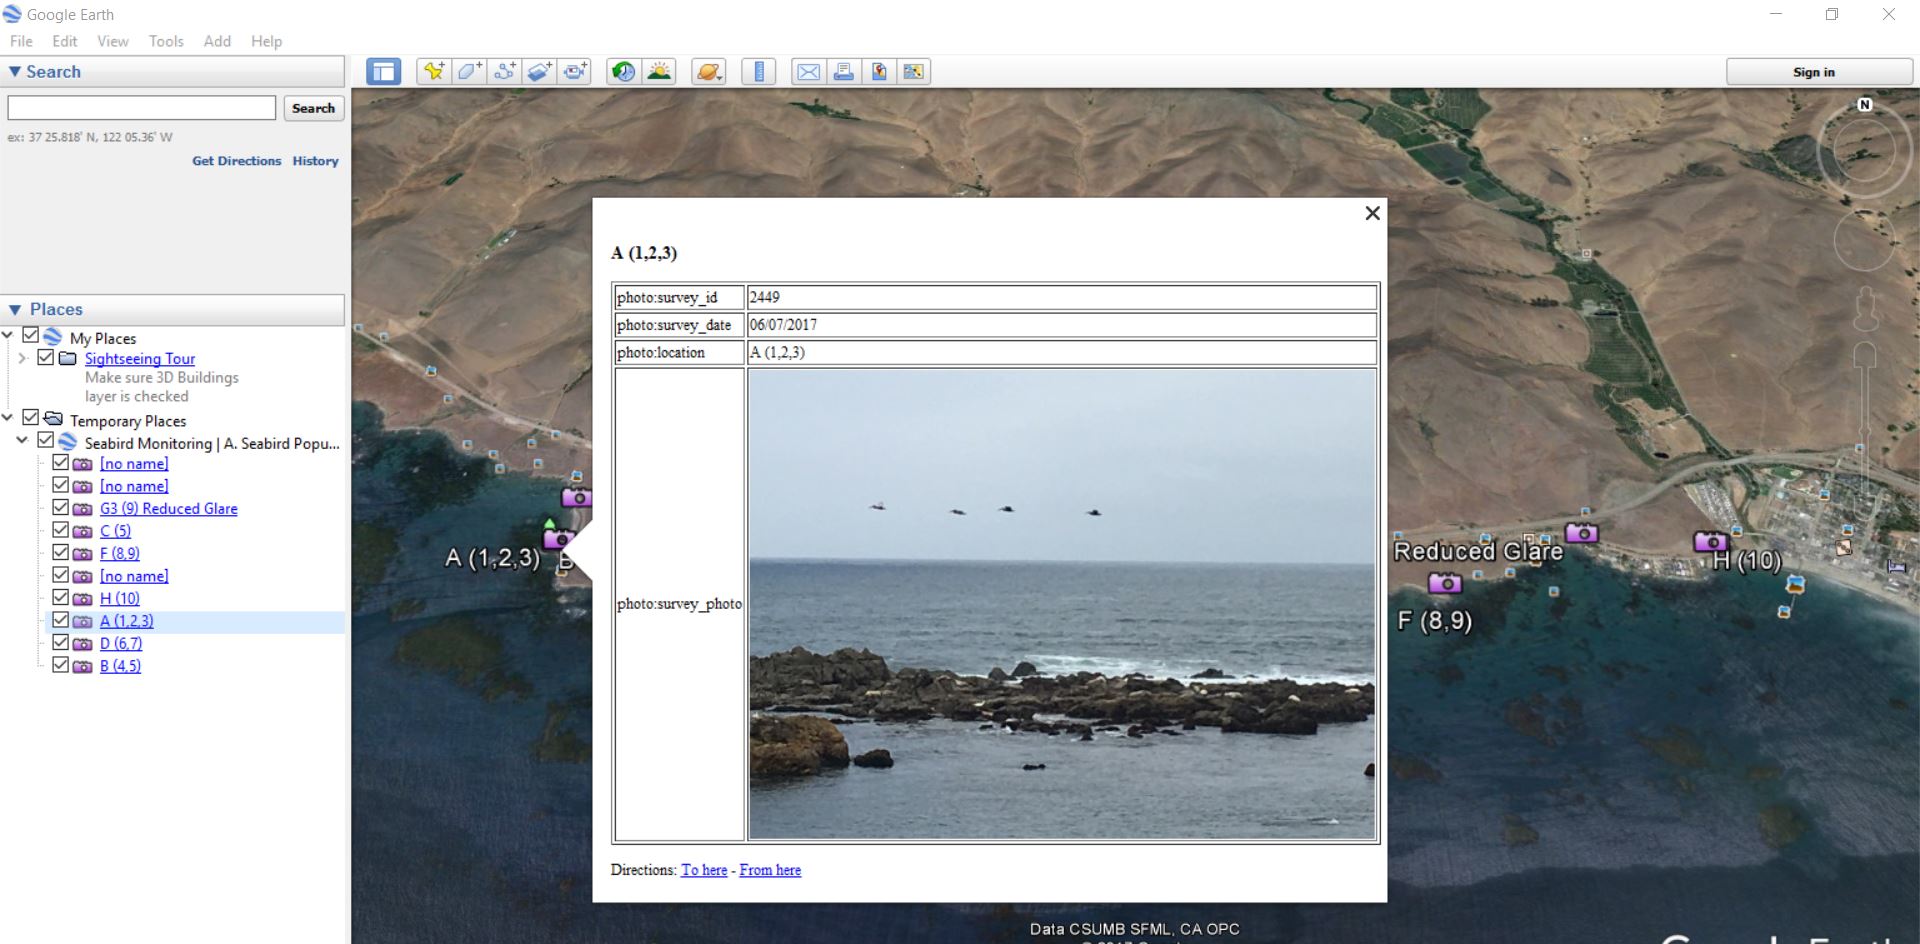 Screenshot of a Wildnote KML report in Google Earth showing a specific image along with the photo id, date, and location.